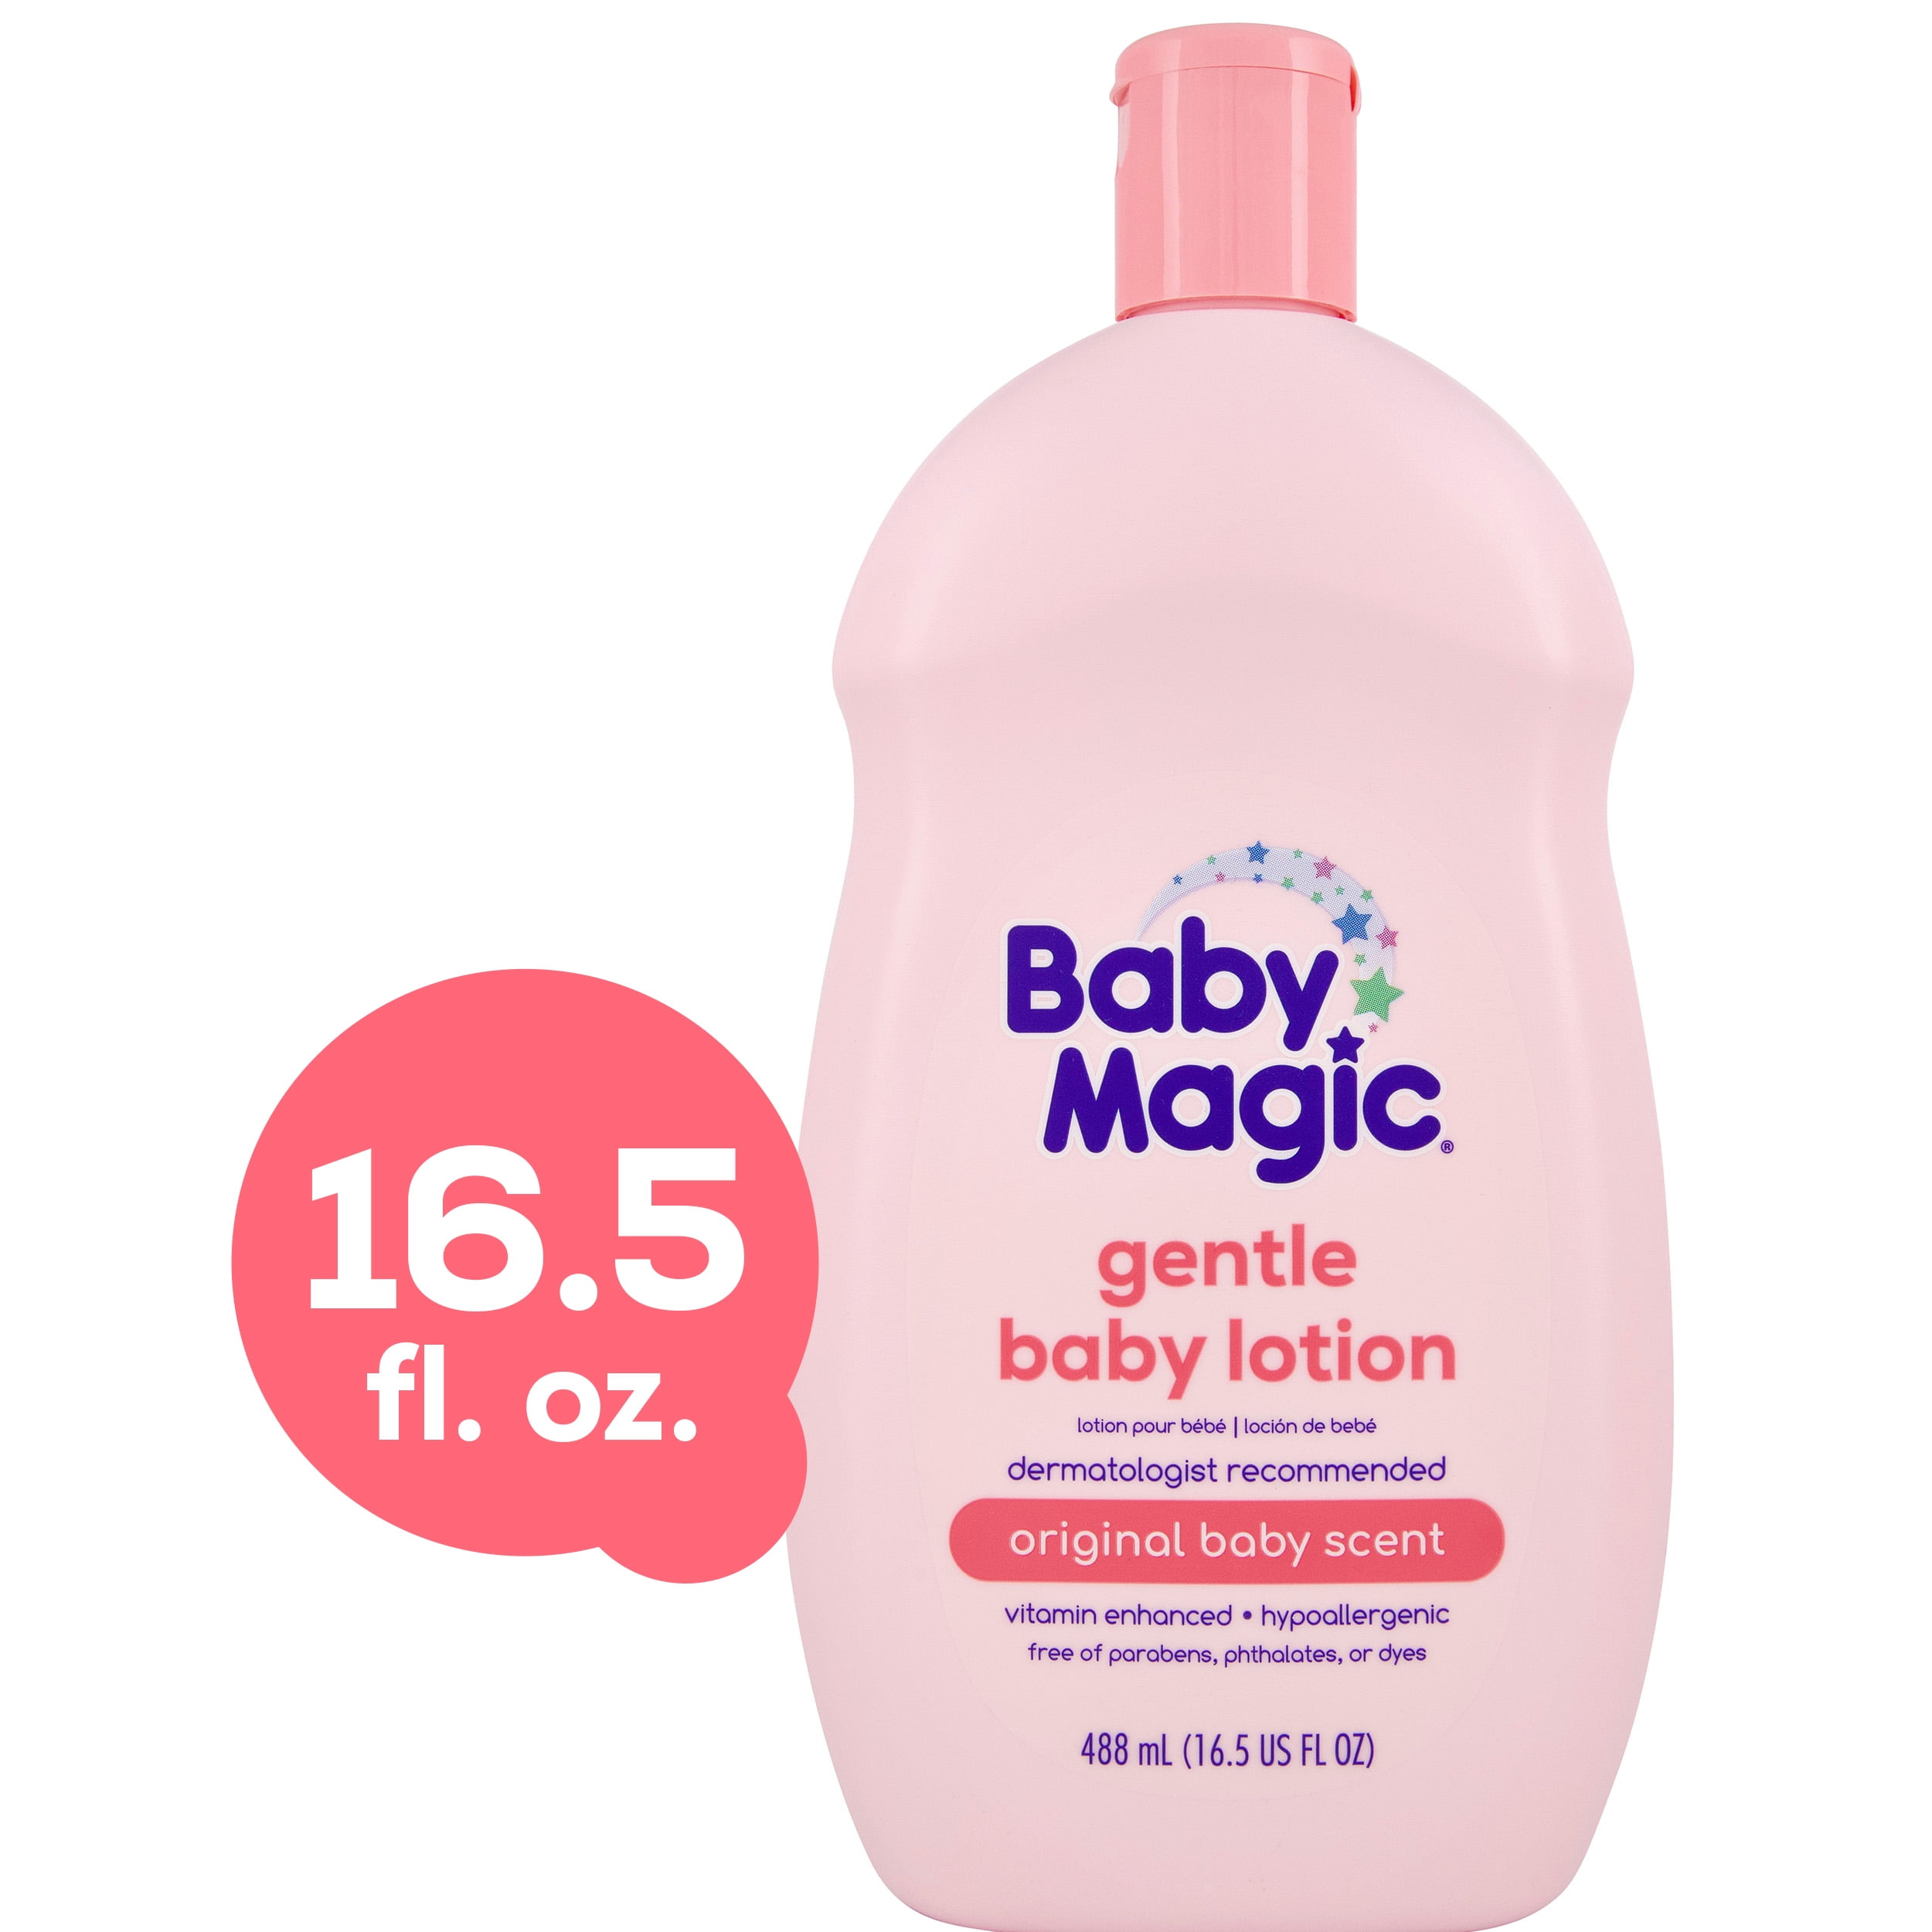 Baby Magic Gentle Lotion with Original Baby Scent, Free of Parabens, Mineral Oil, 16.5 fl oz